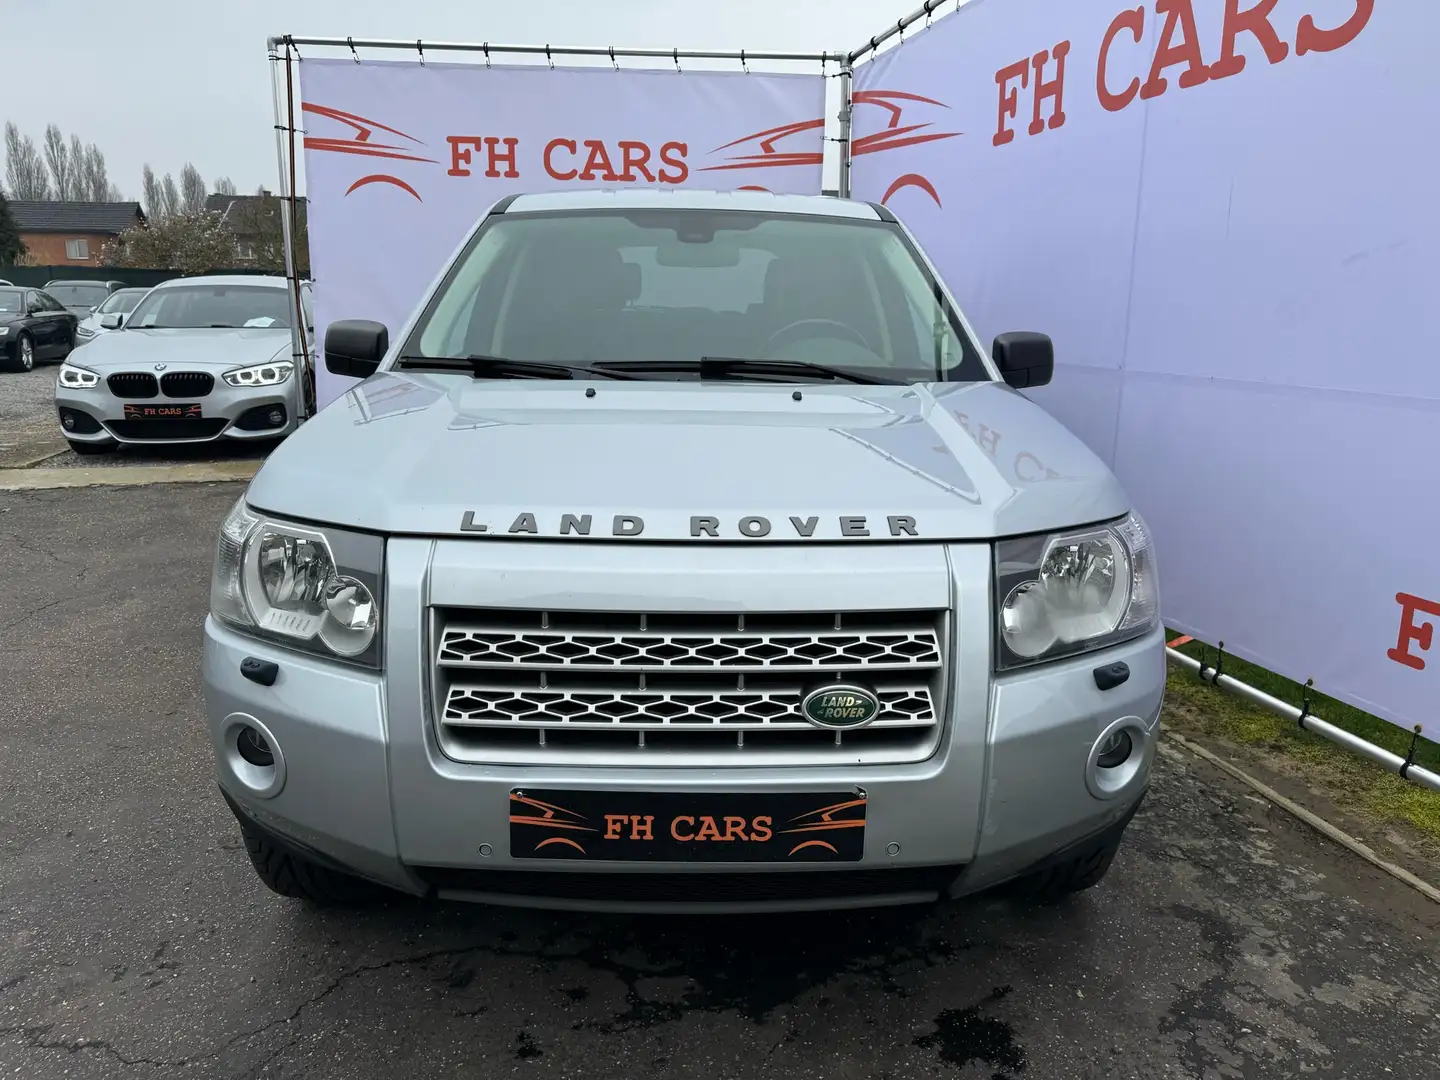 Land Rover Freelander 2.2 ed4 HSE 4x4 AUTOMATIC Argent - 2